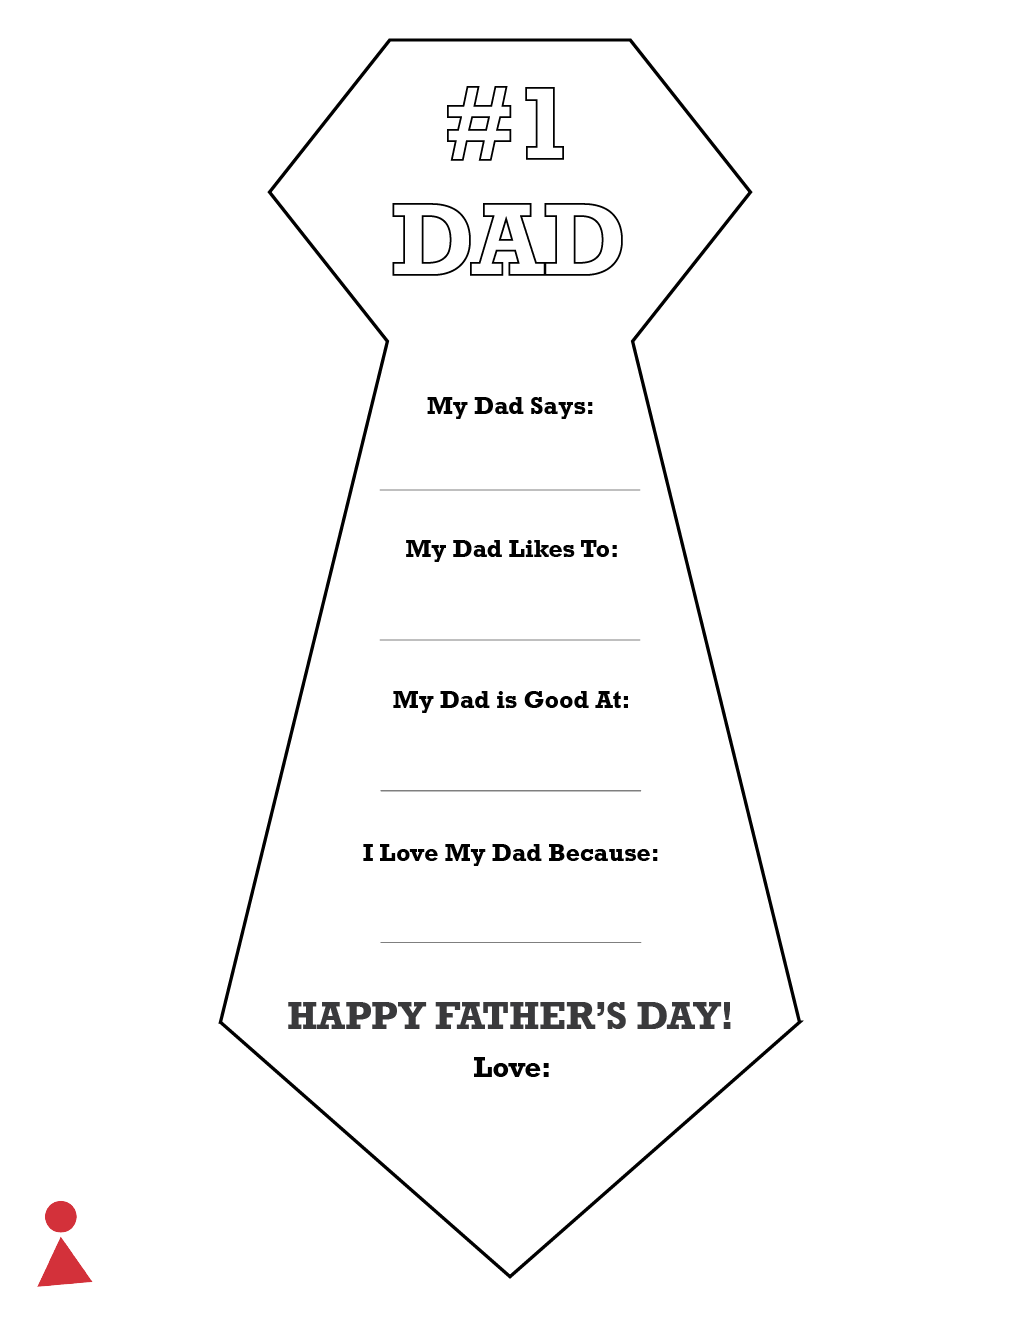 fathers_day_tie